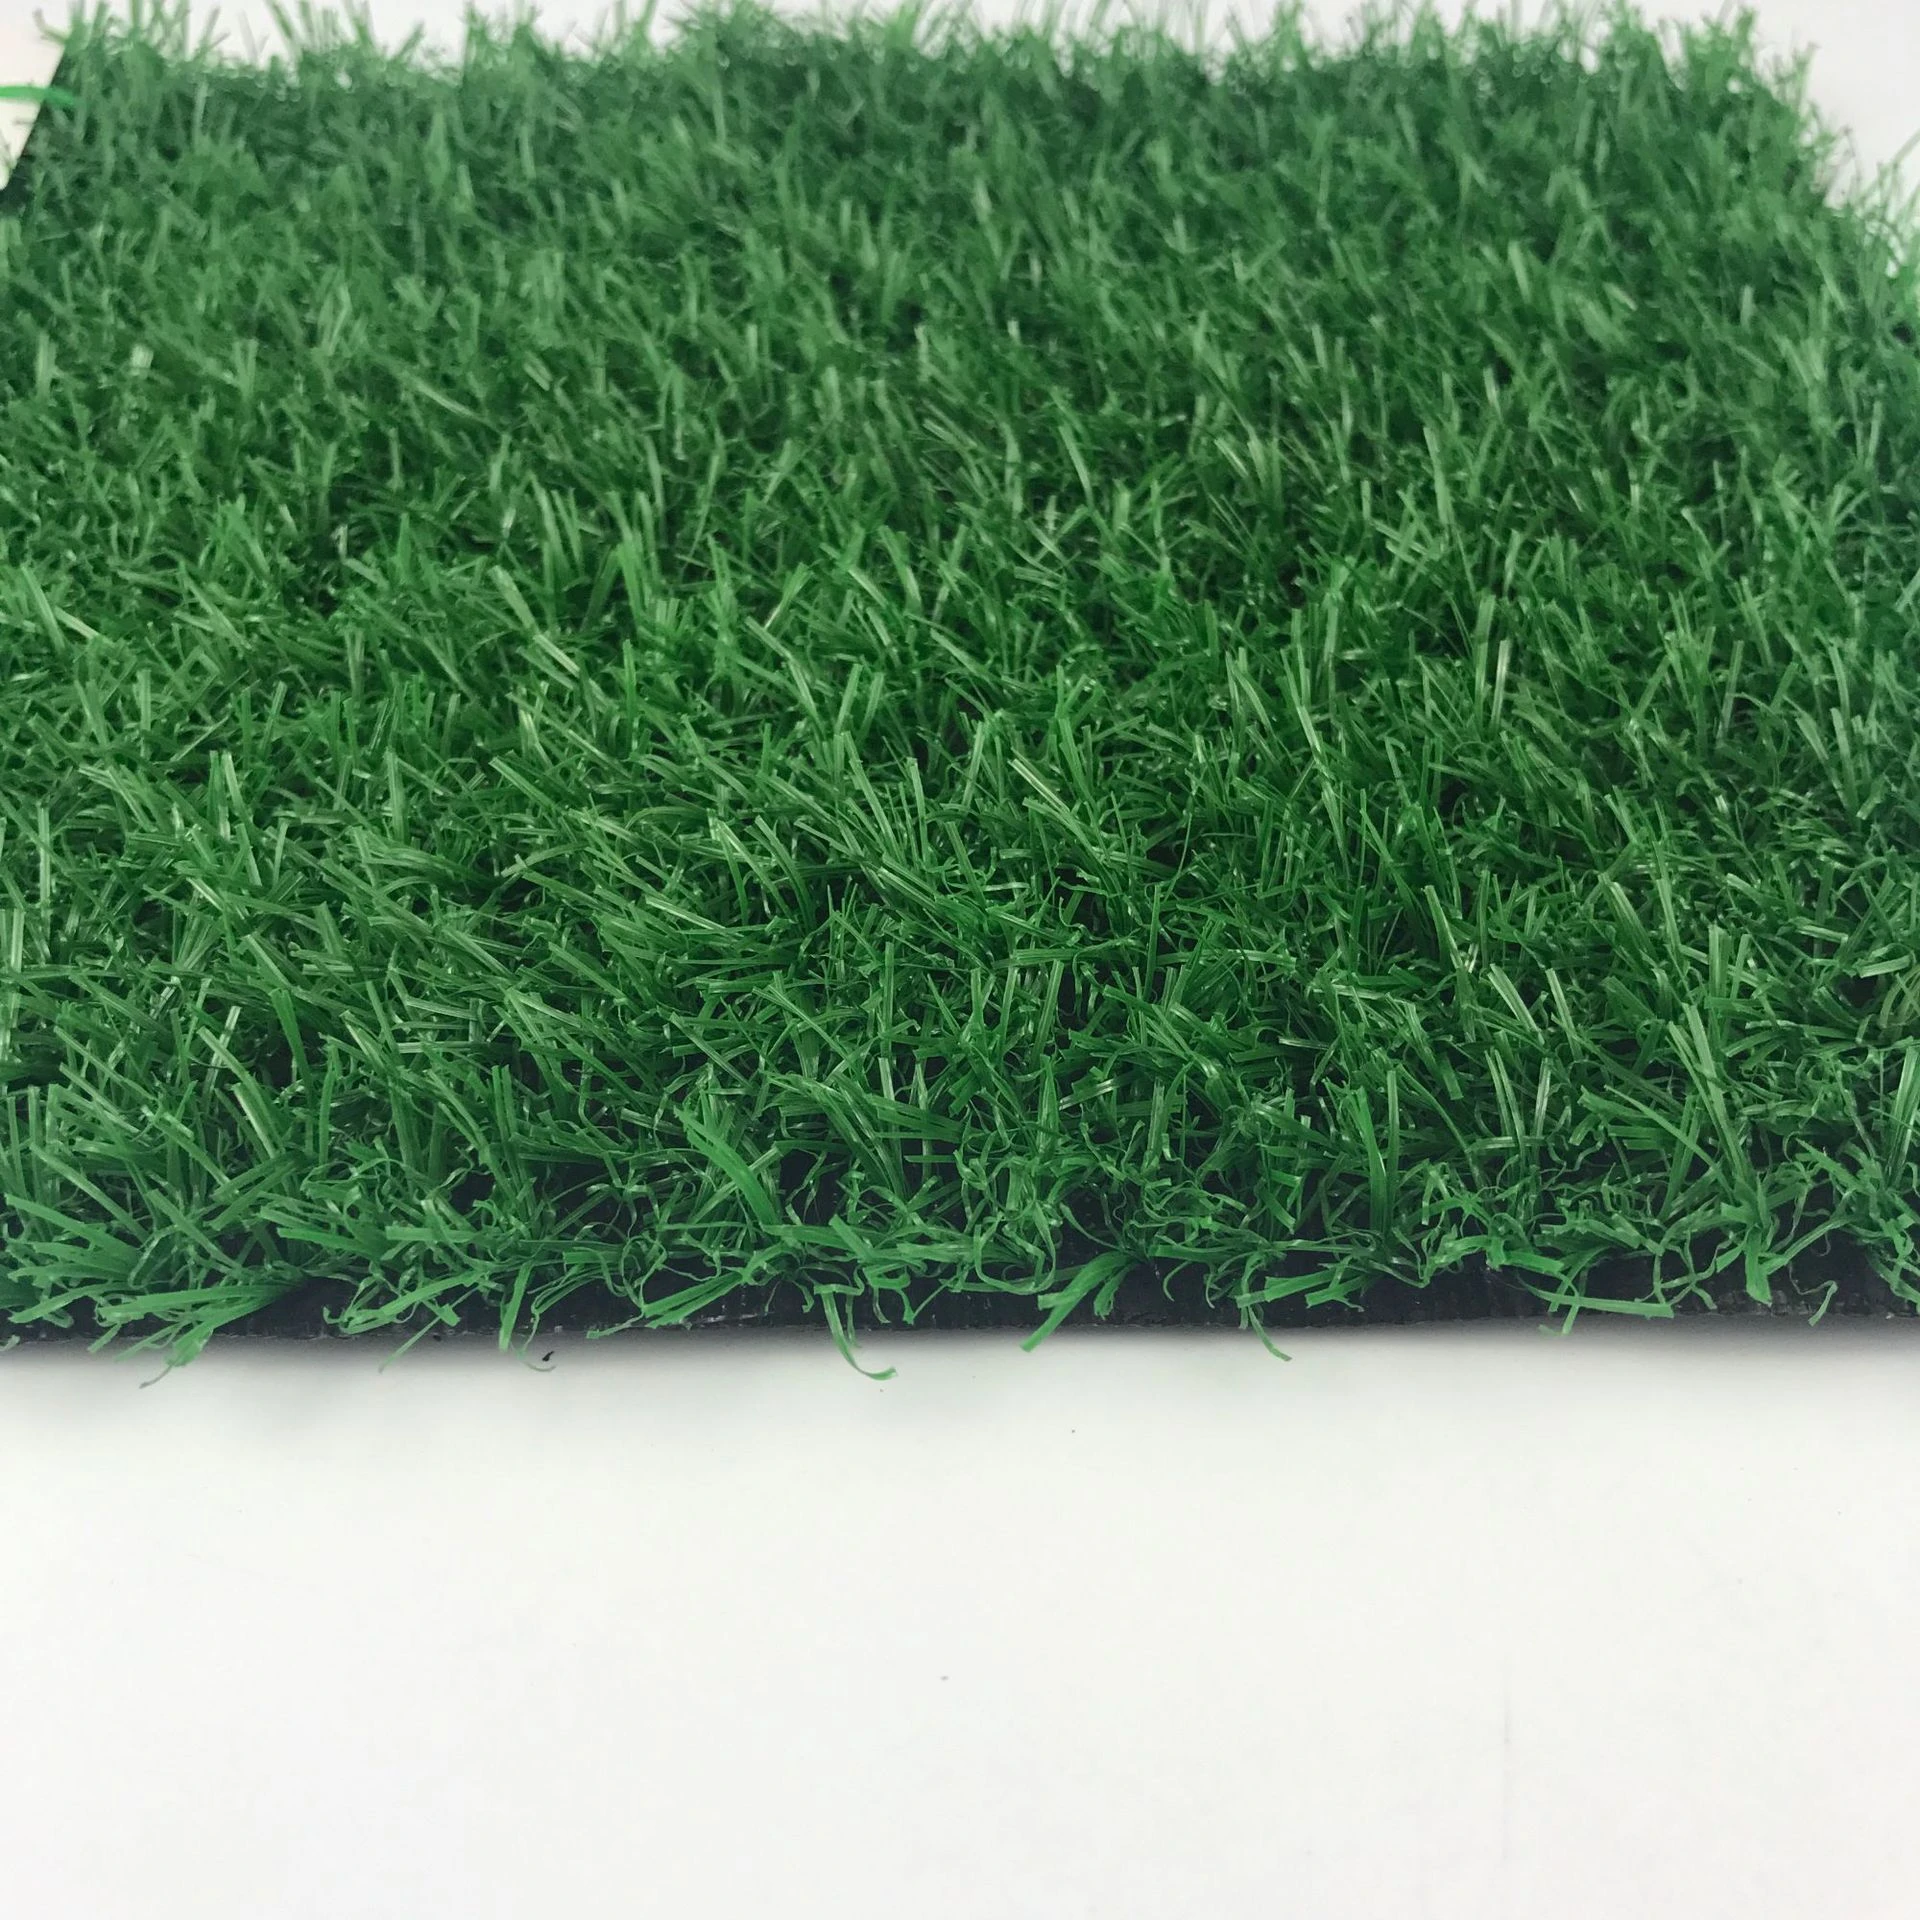 High density wholesale price natural synthetic grass for garden green landscaping artificial grass turf